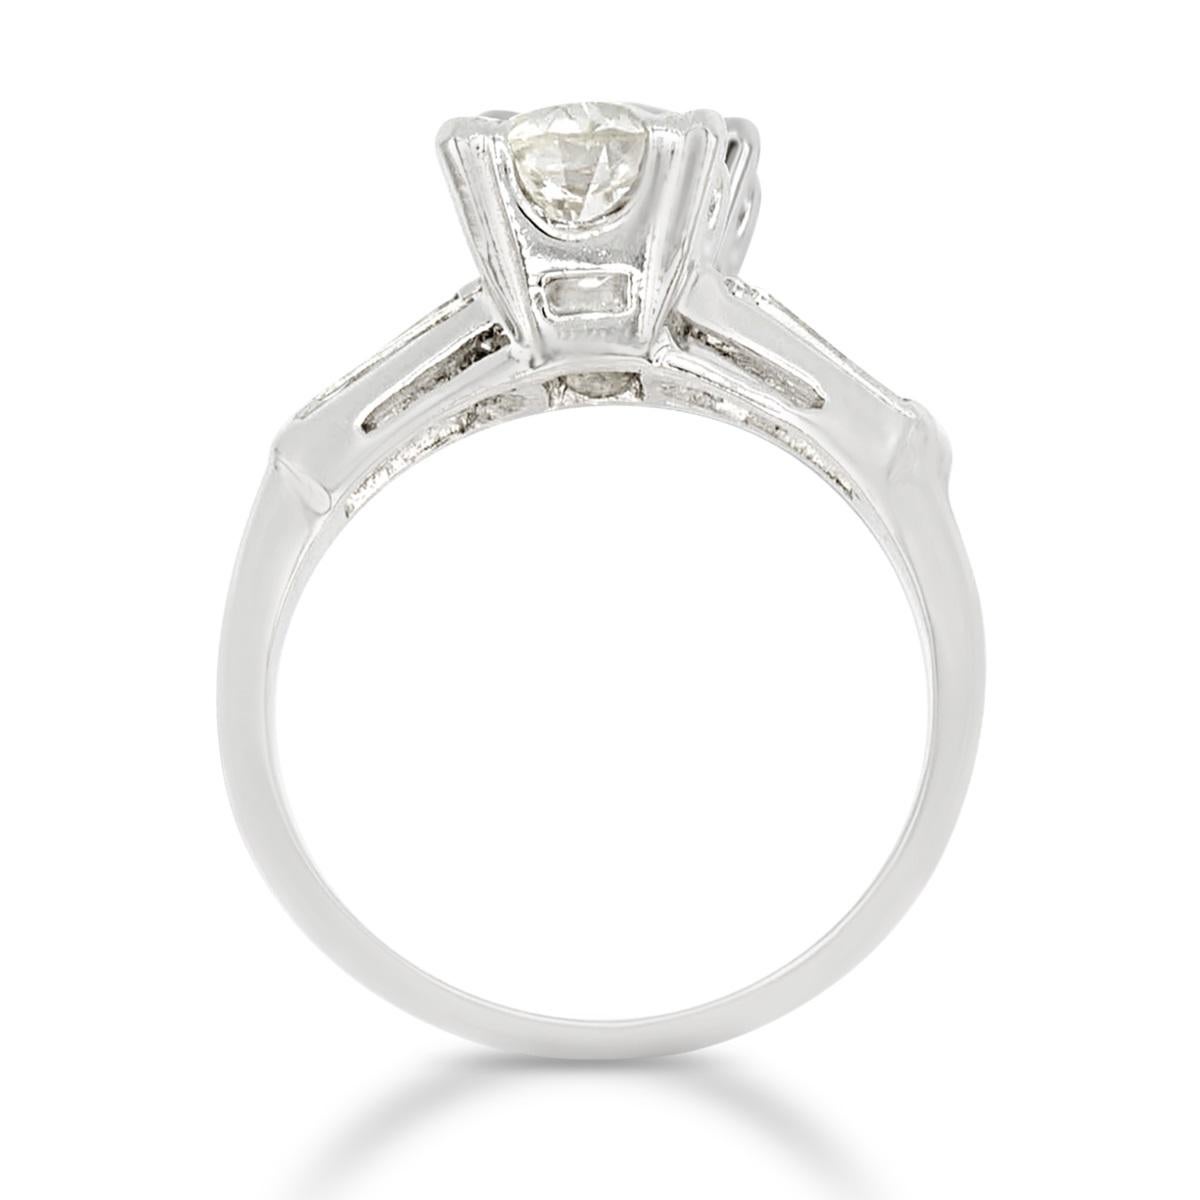 Art Deco GIA Certified 1.43 Ct. Diamond Engagement Ring N VVS2 In Good Condition For Sale In New York, NY